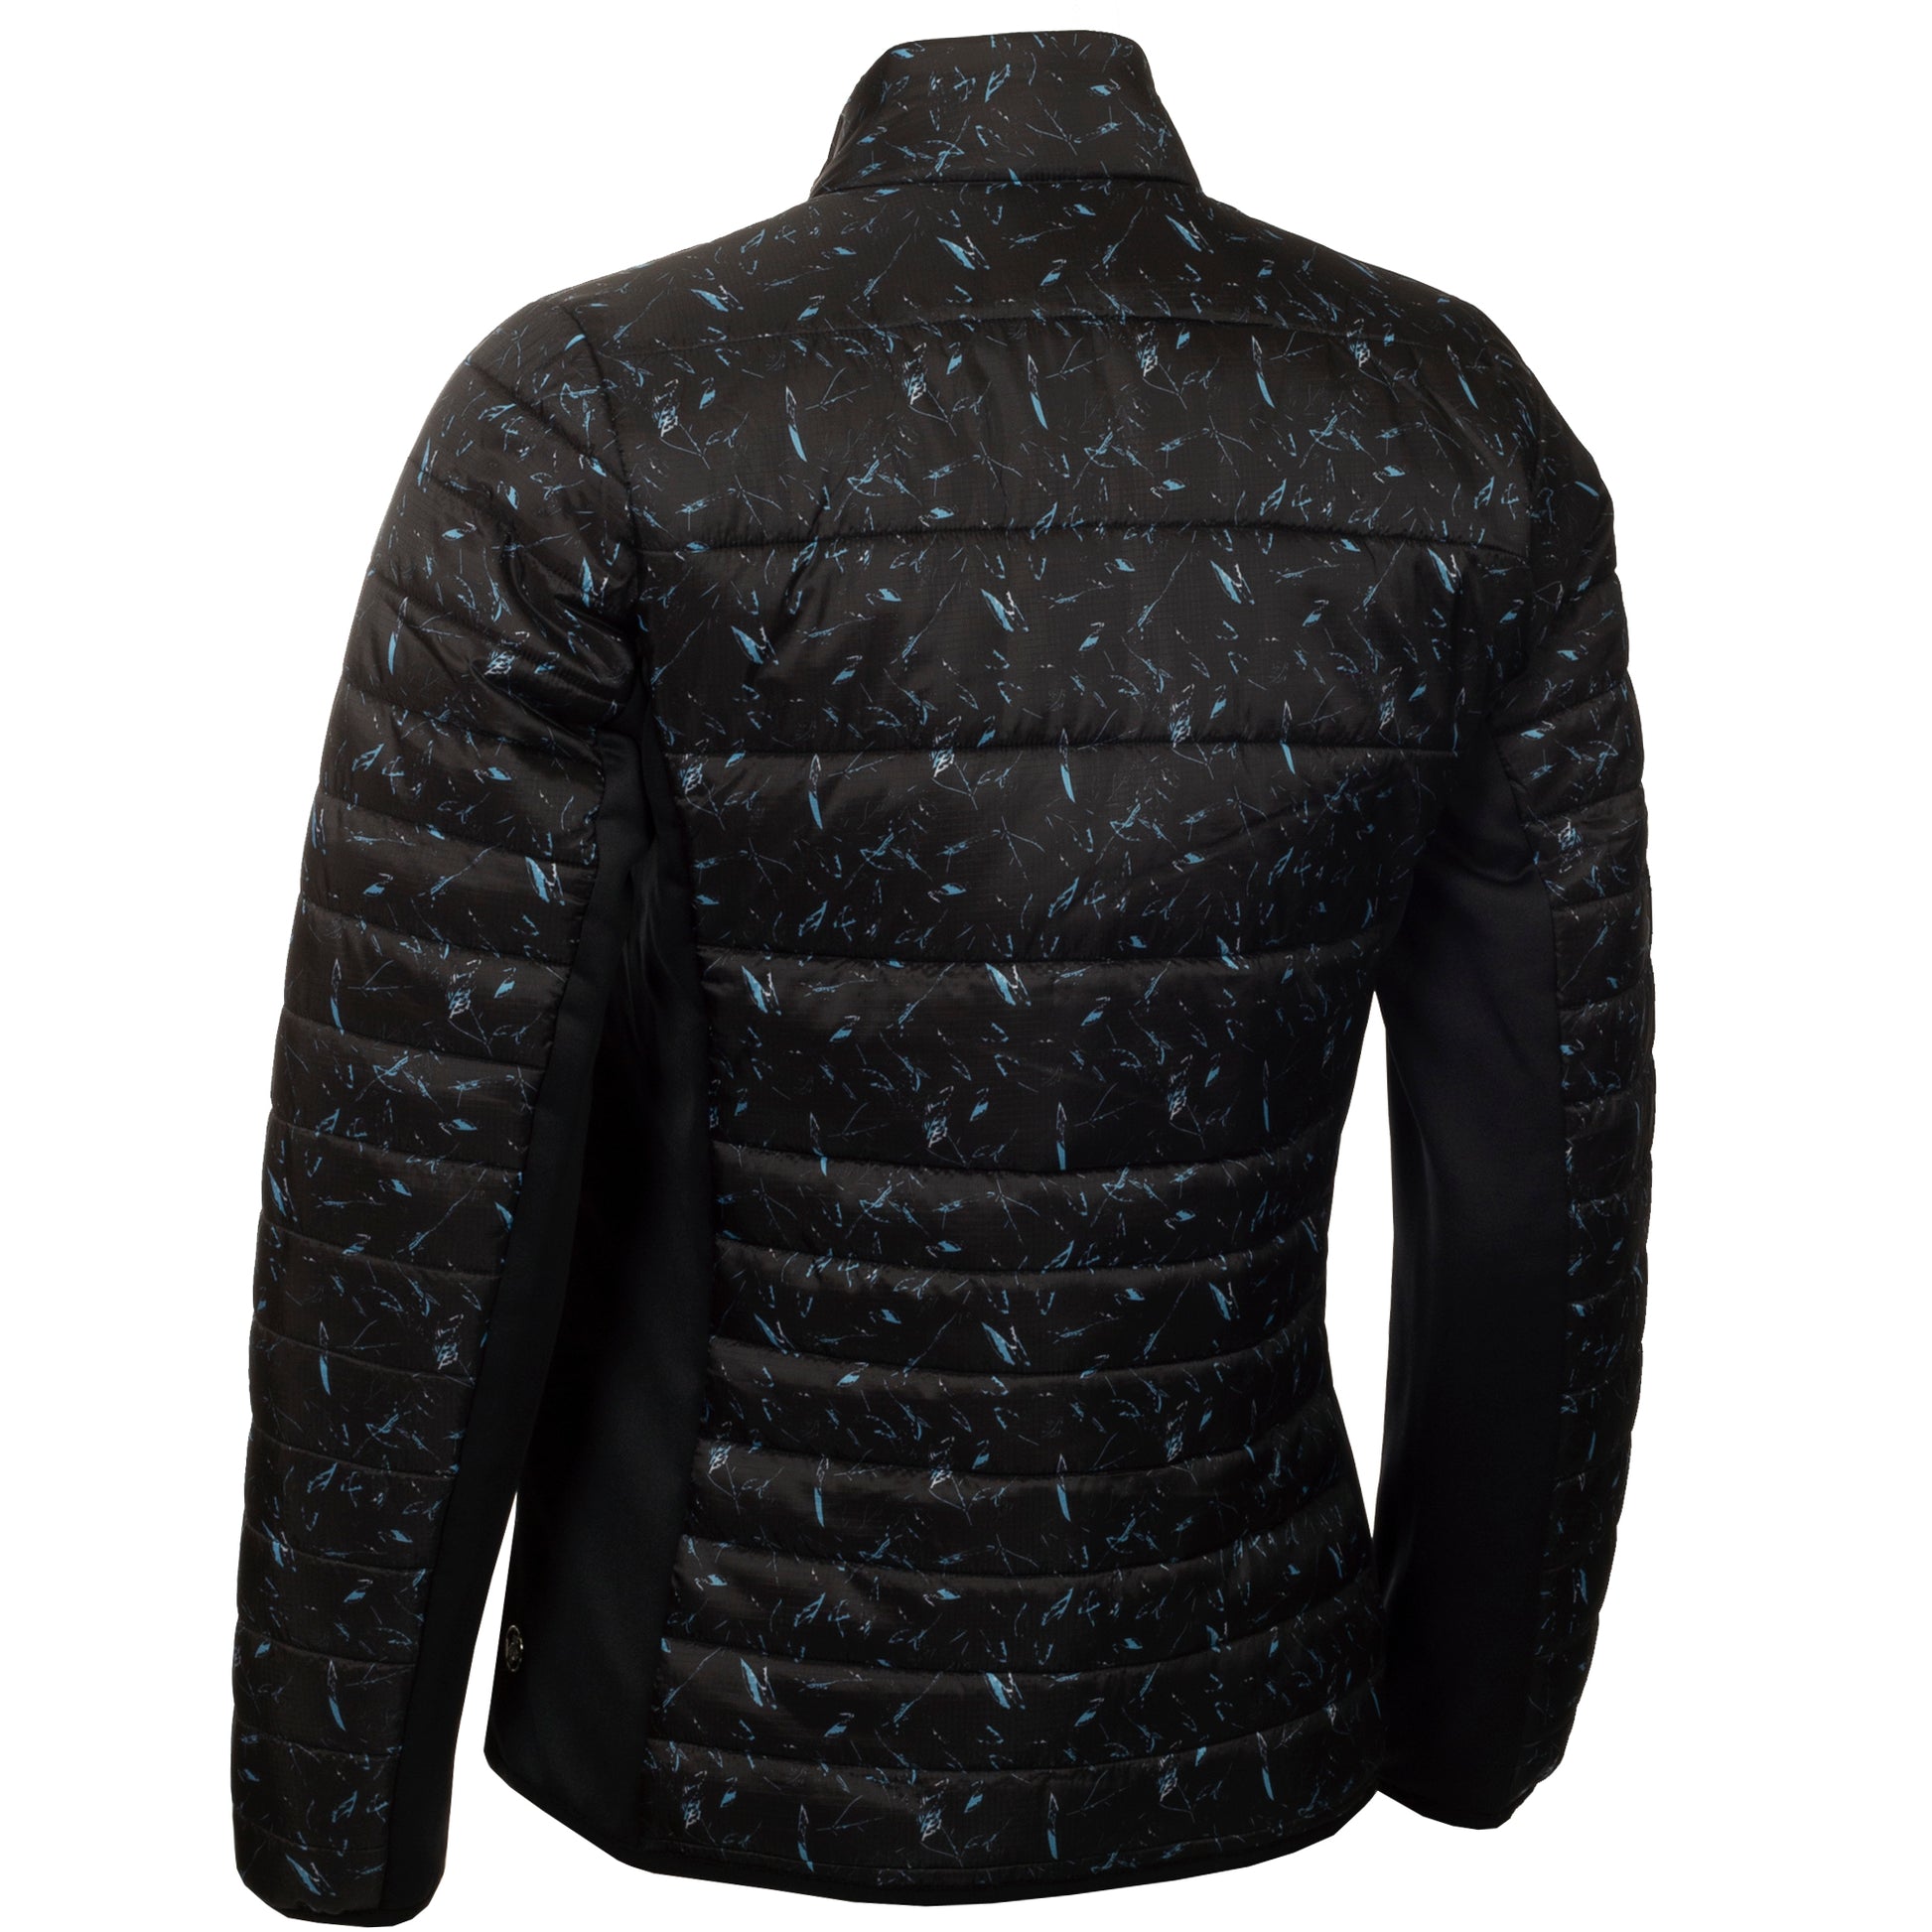 Green Lamb Ladies Quilted Jacket with Stretch Panels in Black Leaf Print